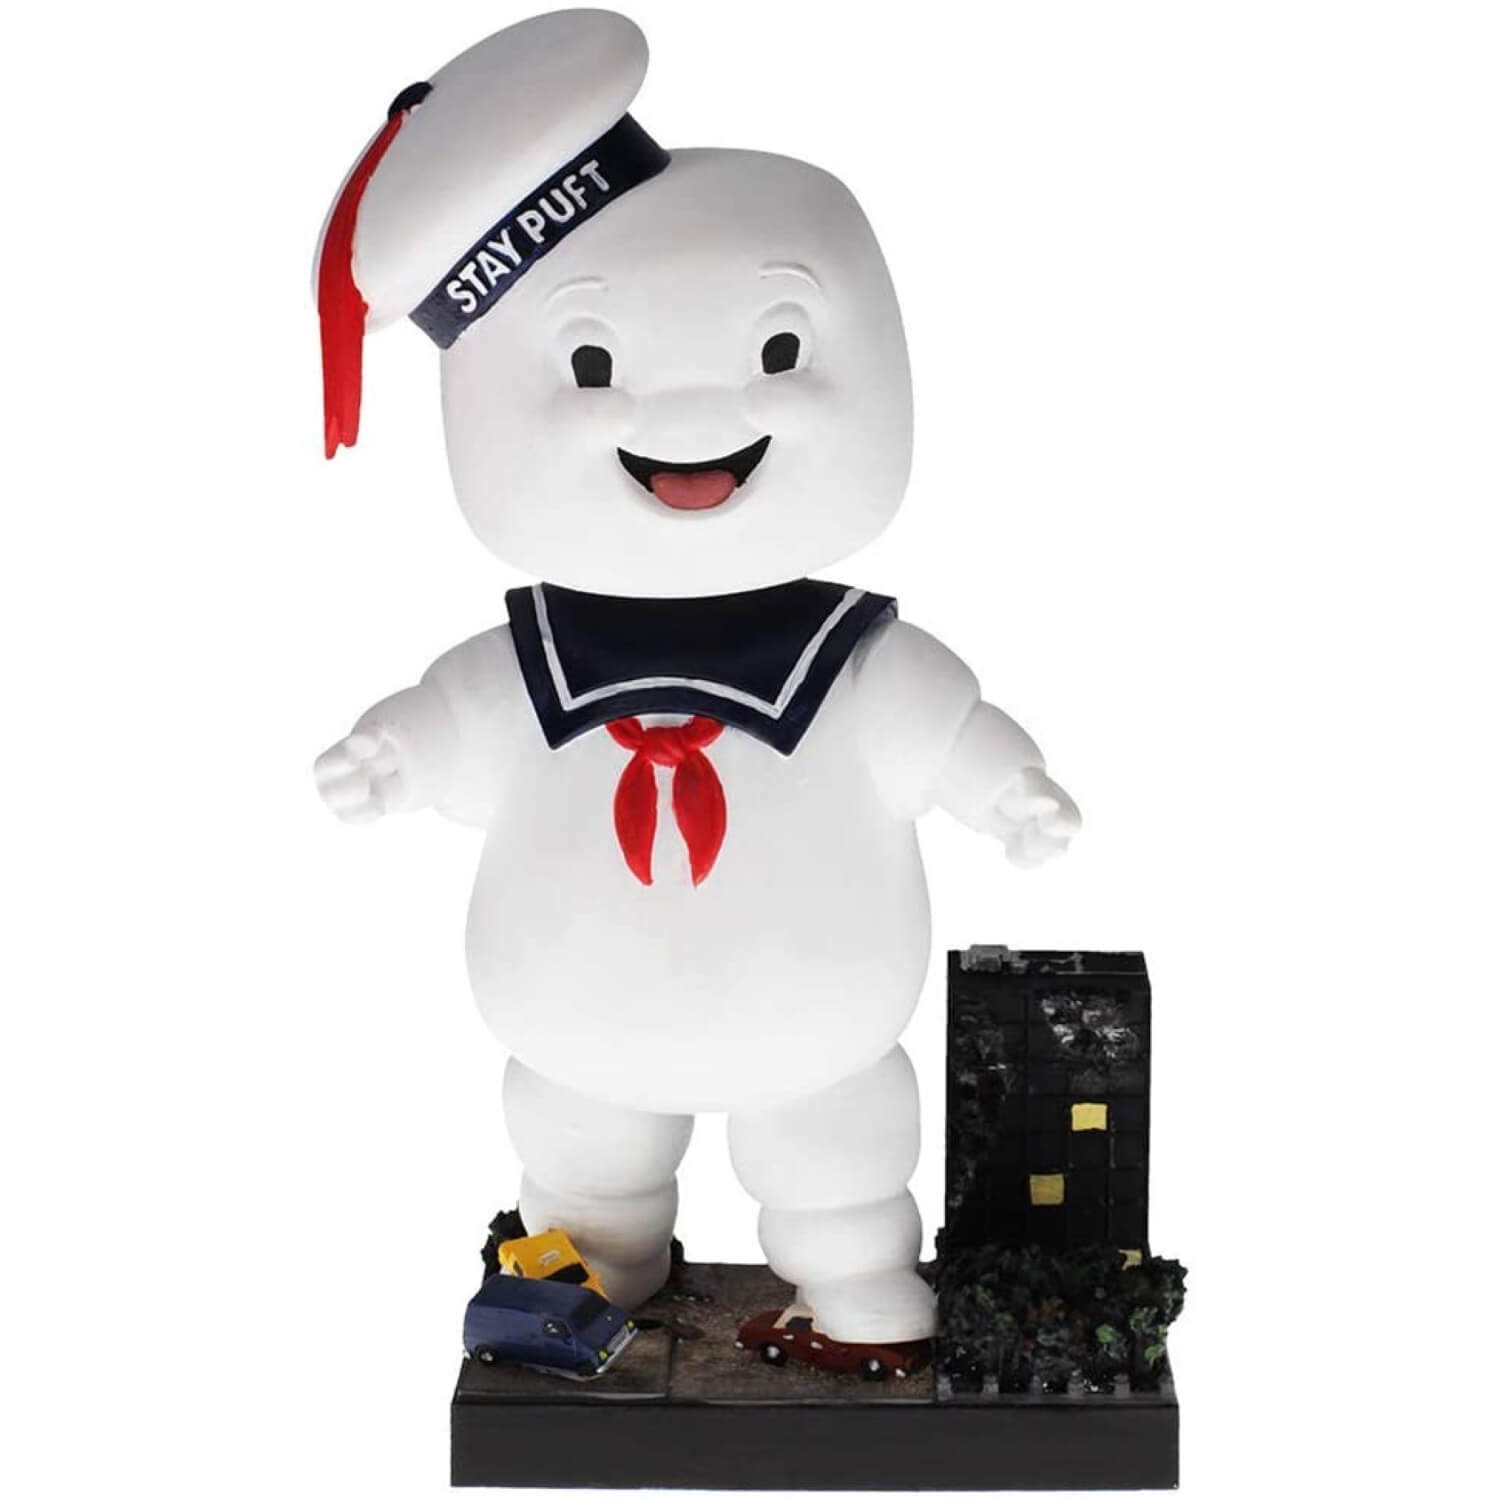 Royal Bobbles Ghostbusters Stay Puft Marshmallow Man Bobblehead Figure